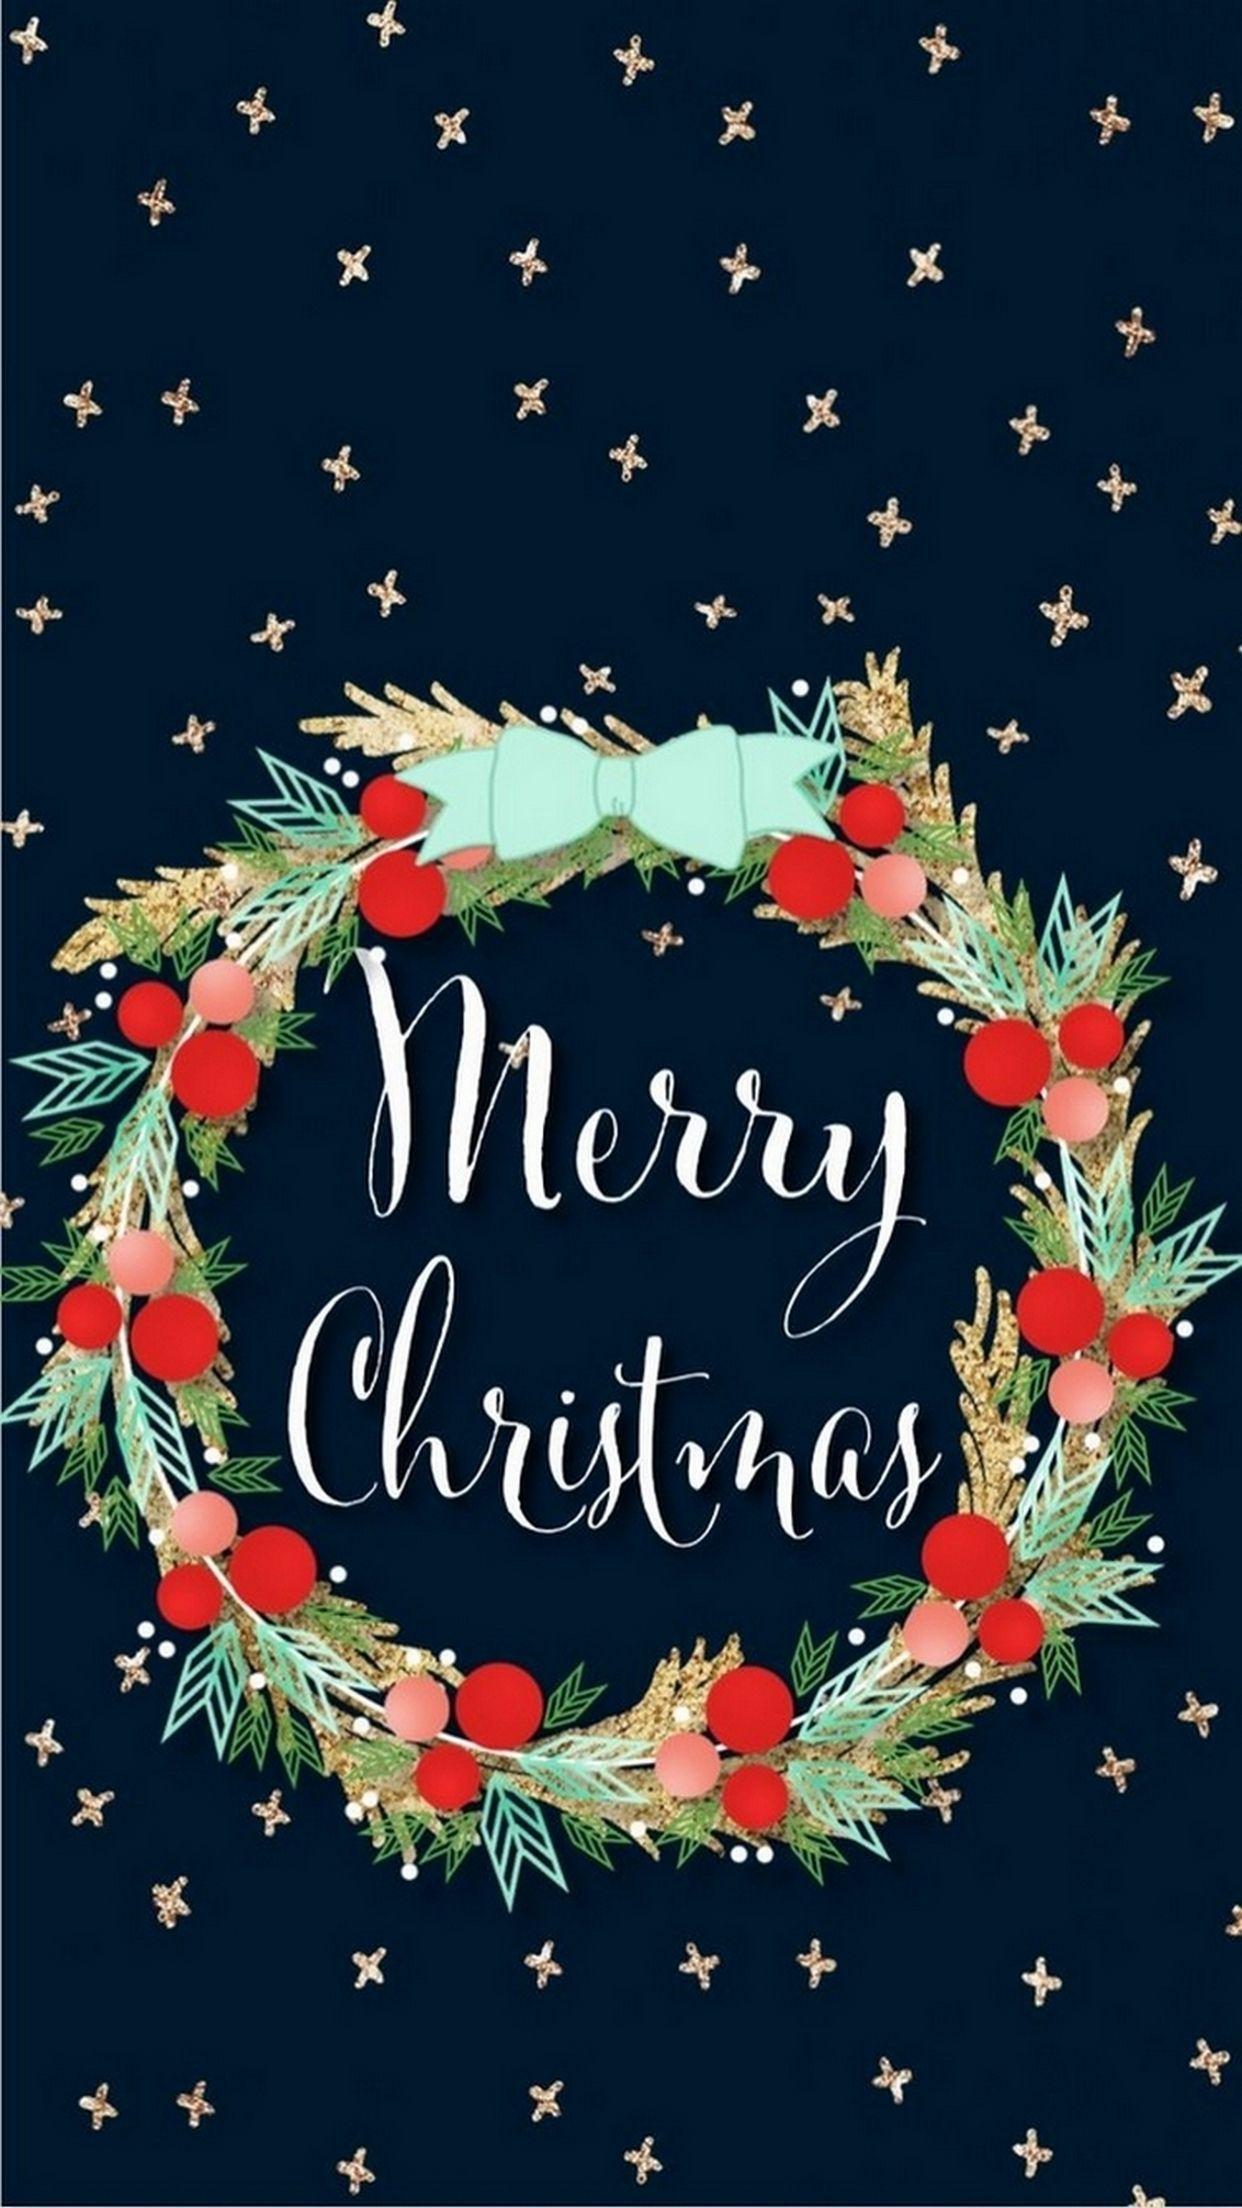 Merry Christmas iPhone Wallpapers